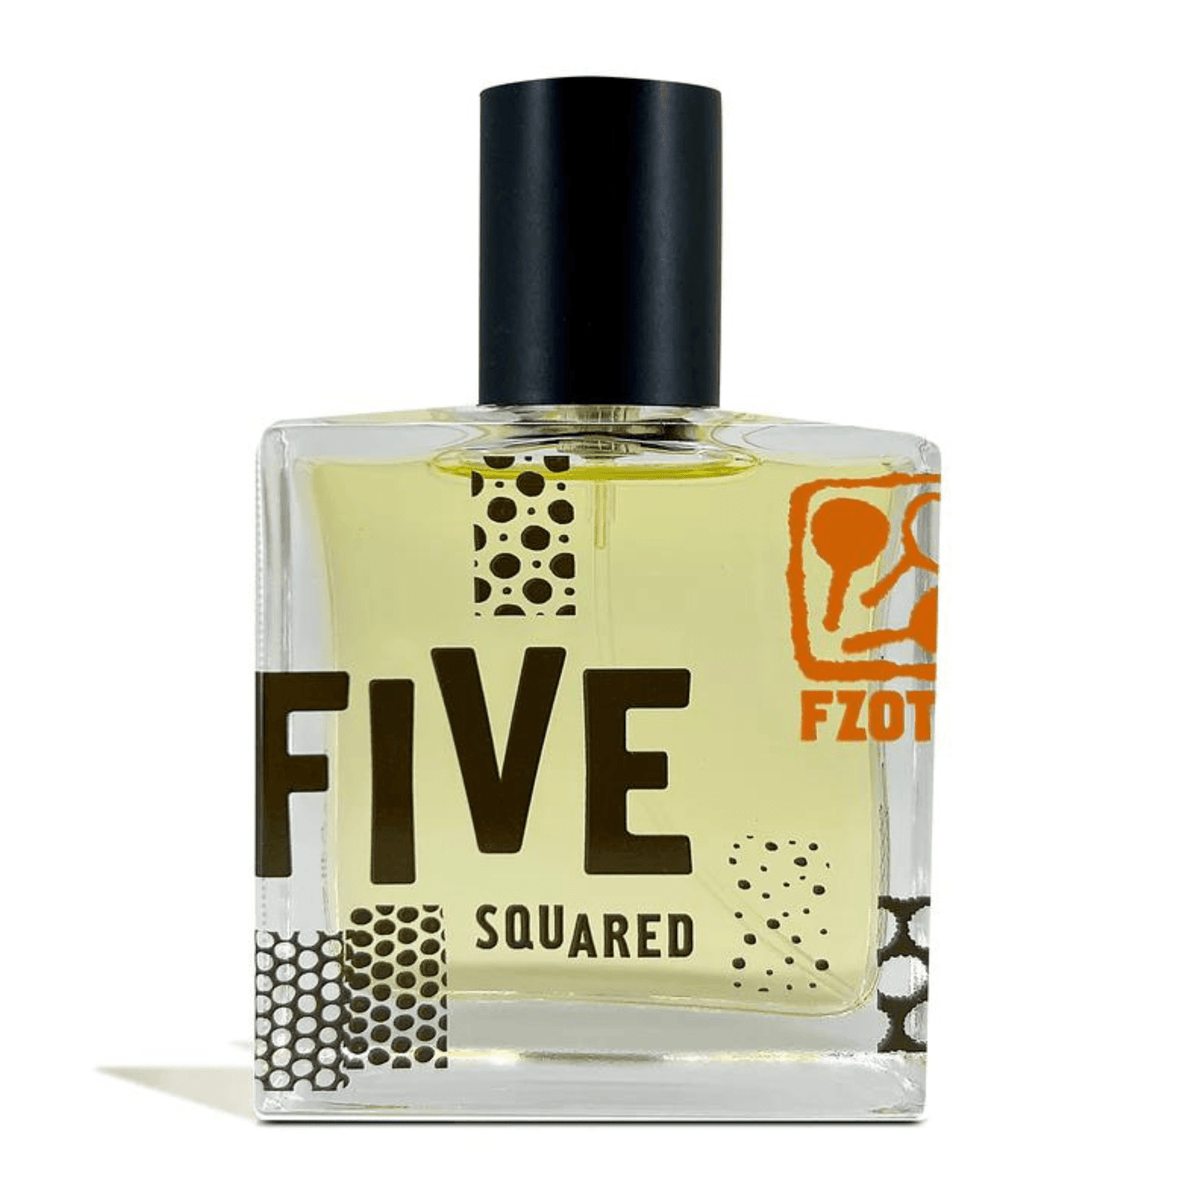 Primary Image of Five Squared EDP